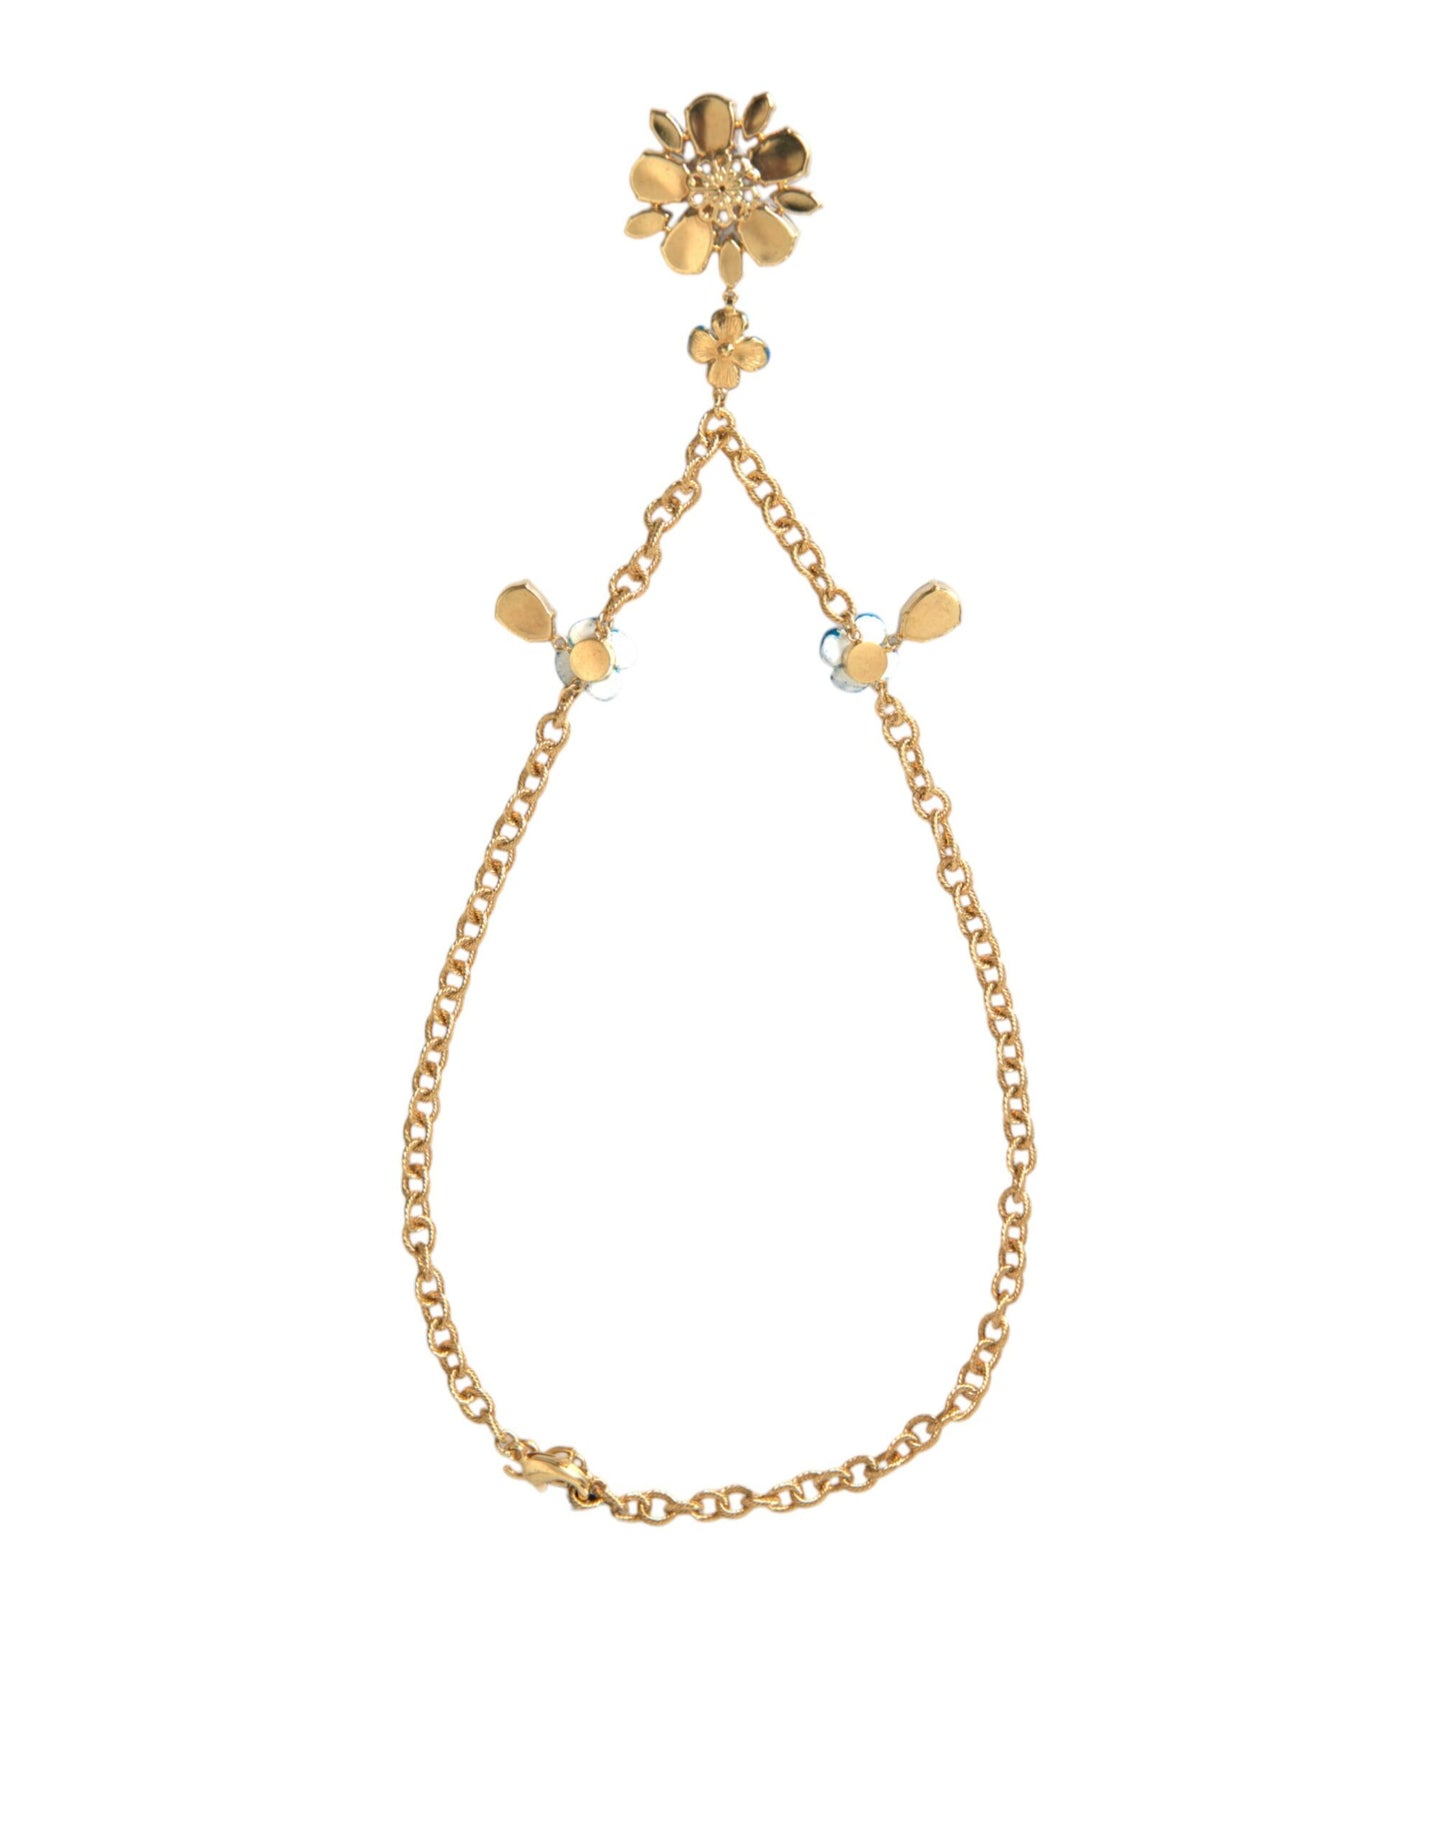 Gold Brass Chain Crystal Floral Pendant Charm Necklace